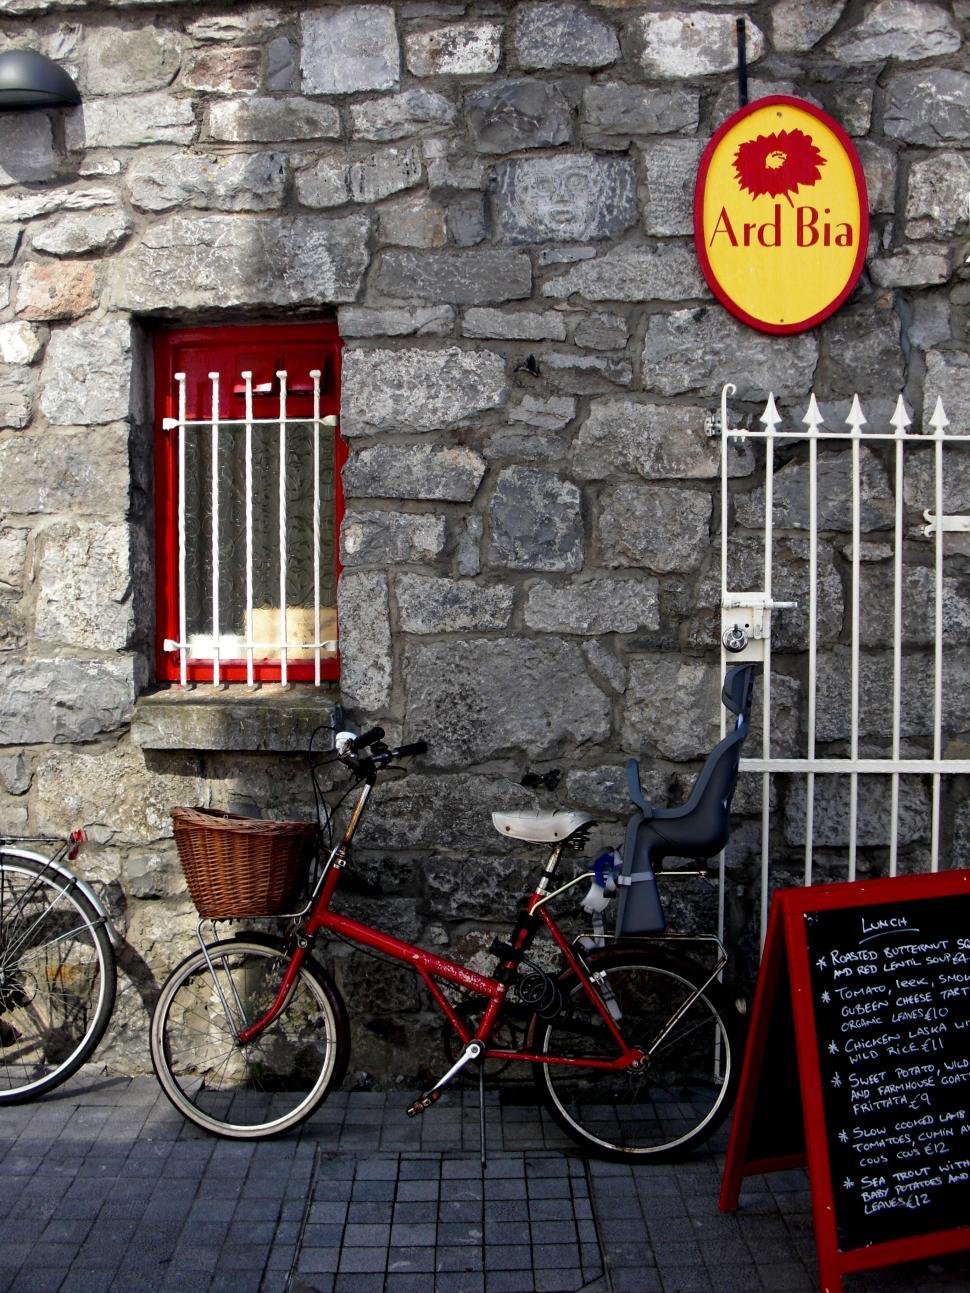 Free Image of Ireland - Galway - Bike and Bistro 